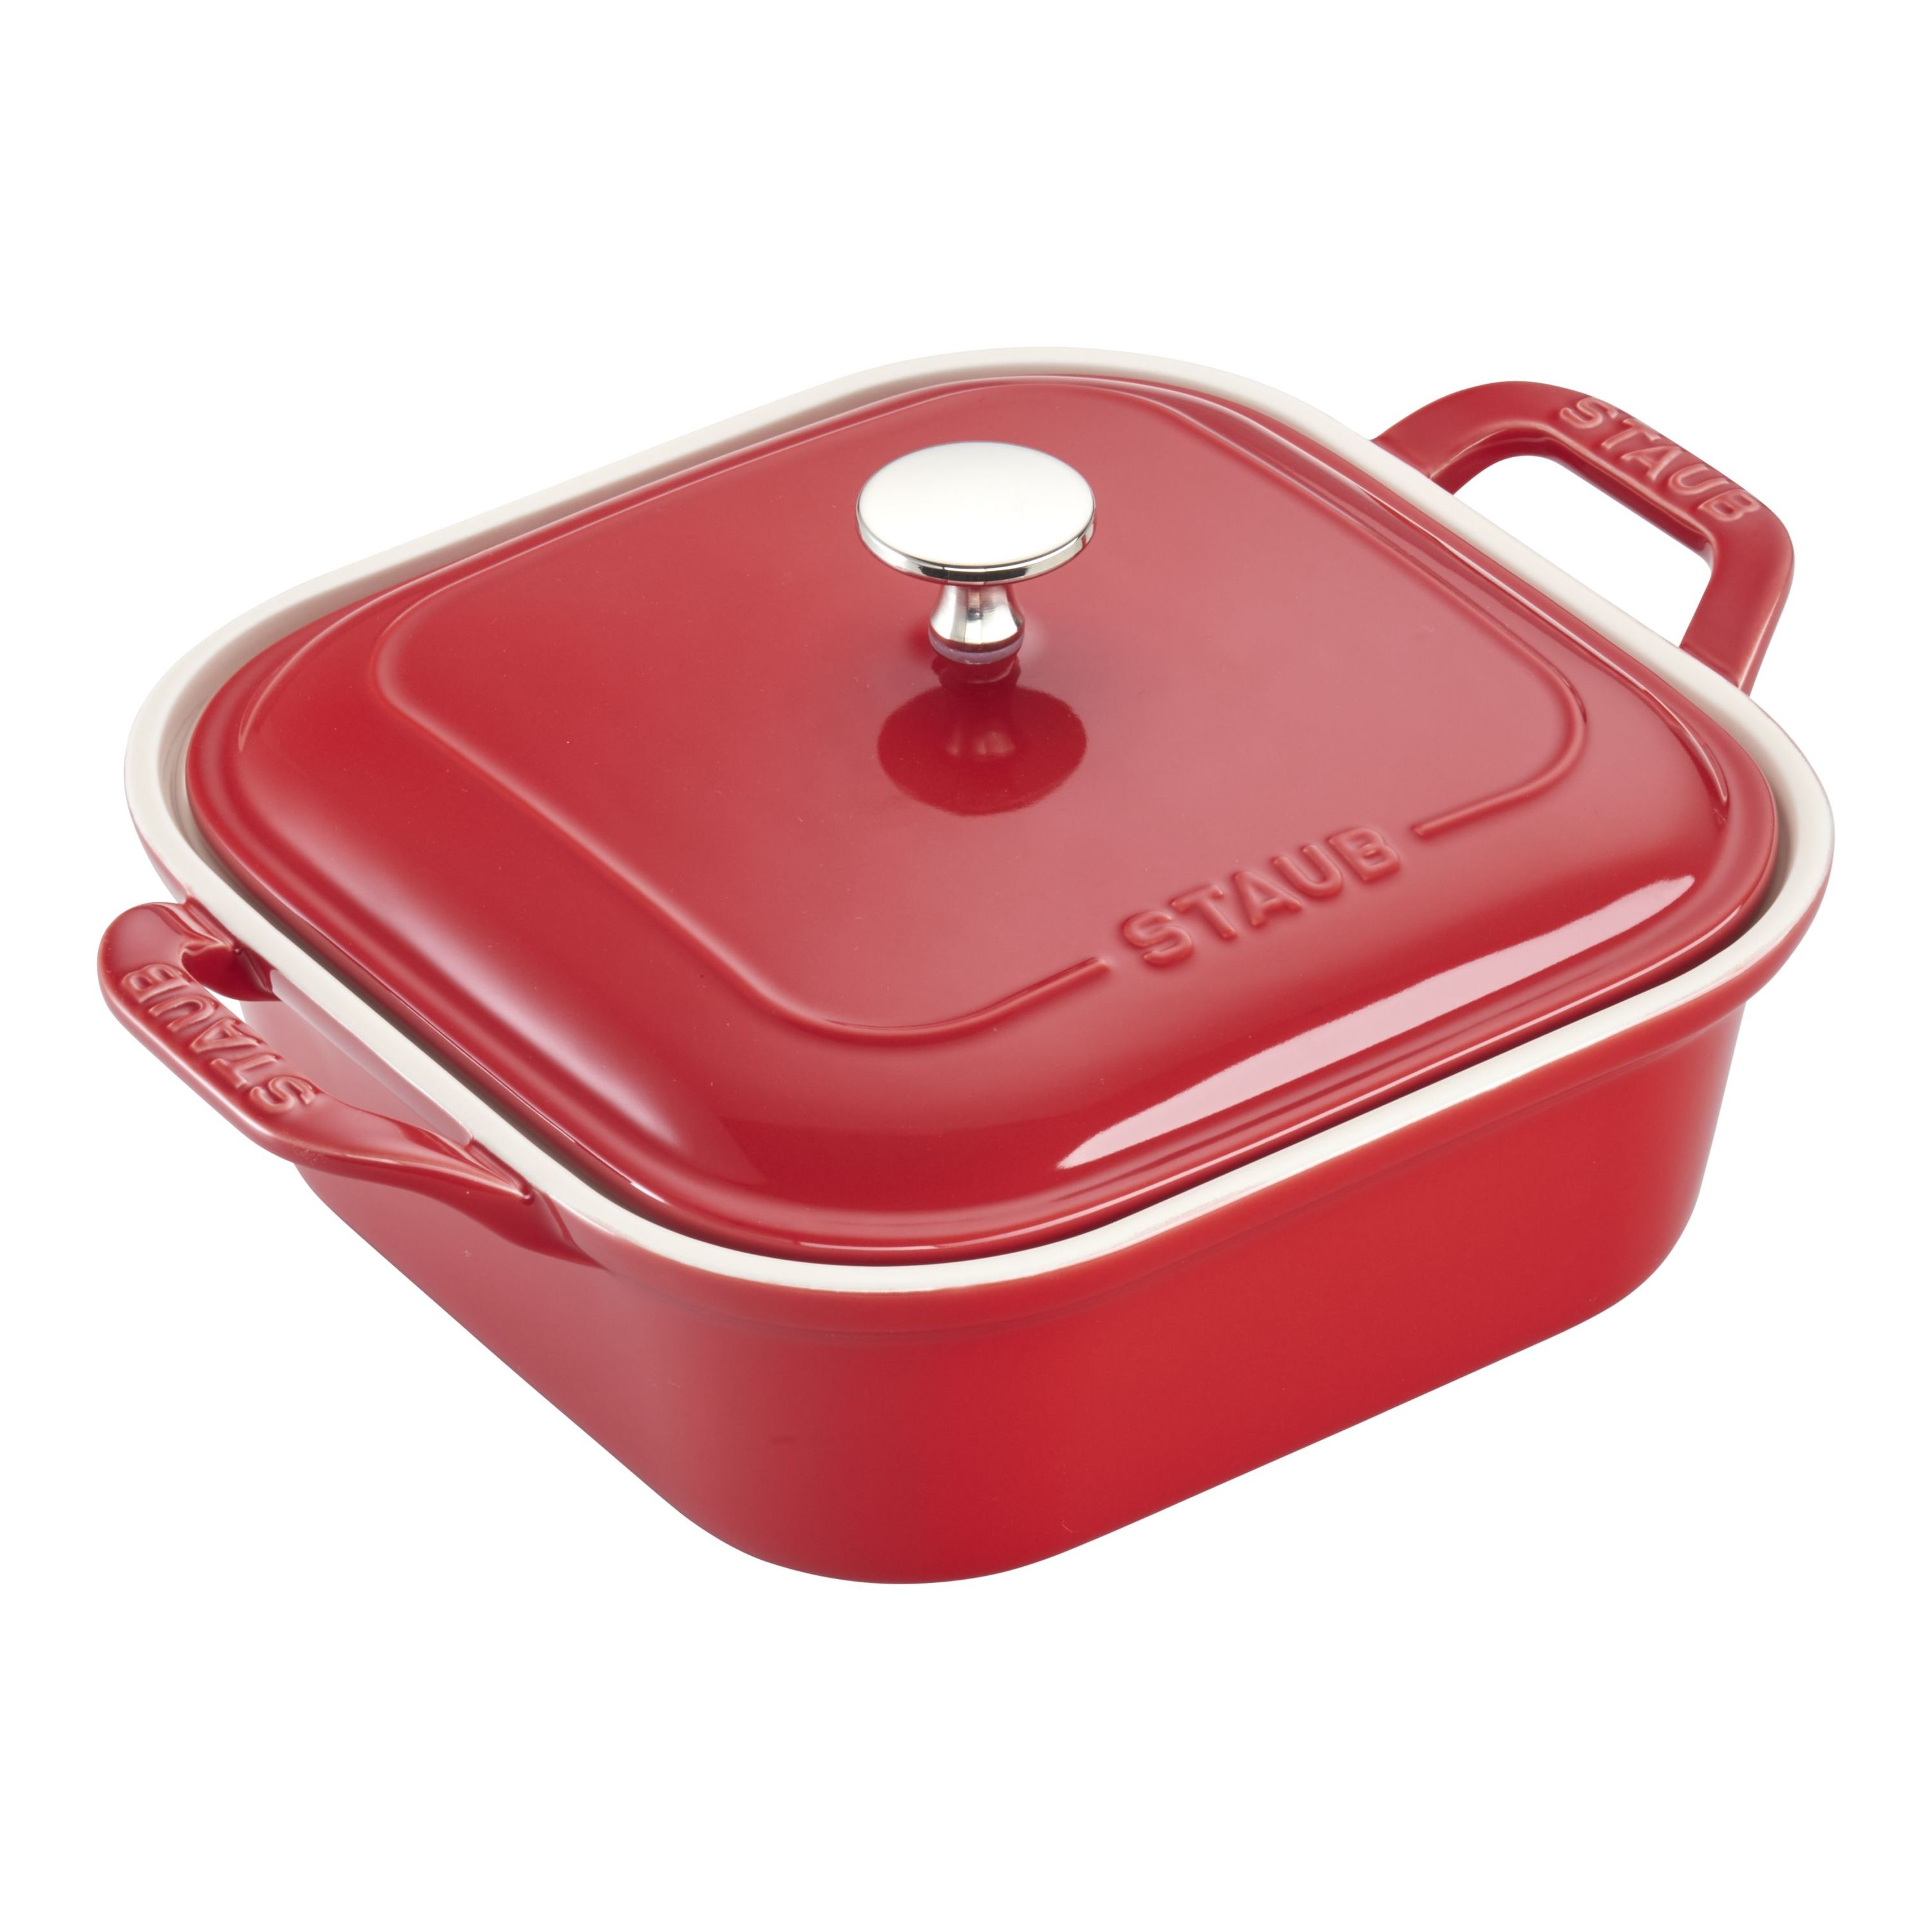 Staub Ceramic - Covered Baking Dishes 9-inch, square, Covered Baking Dish,  cherry